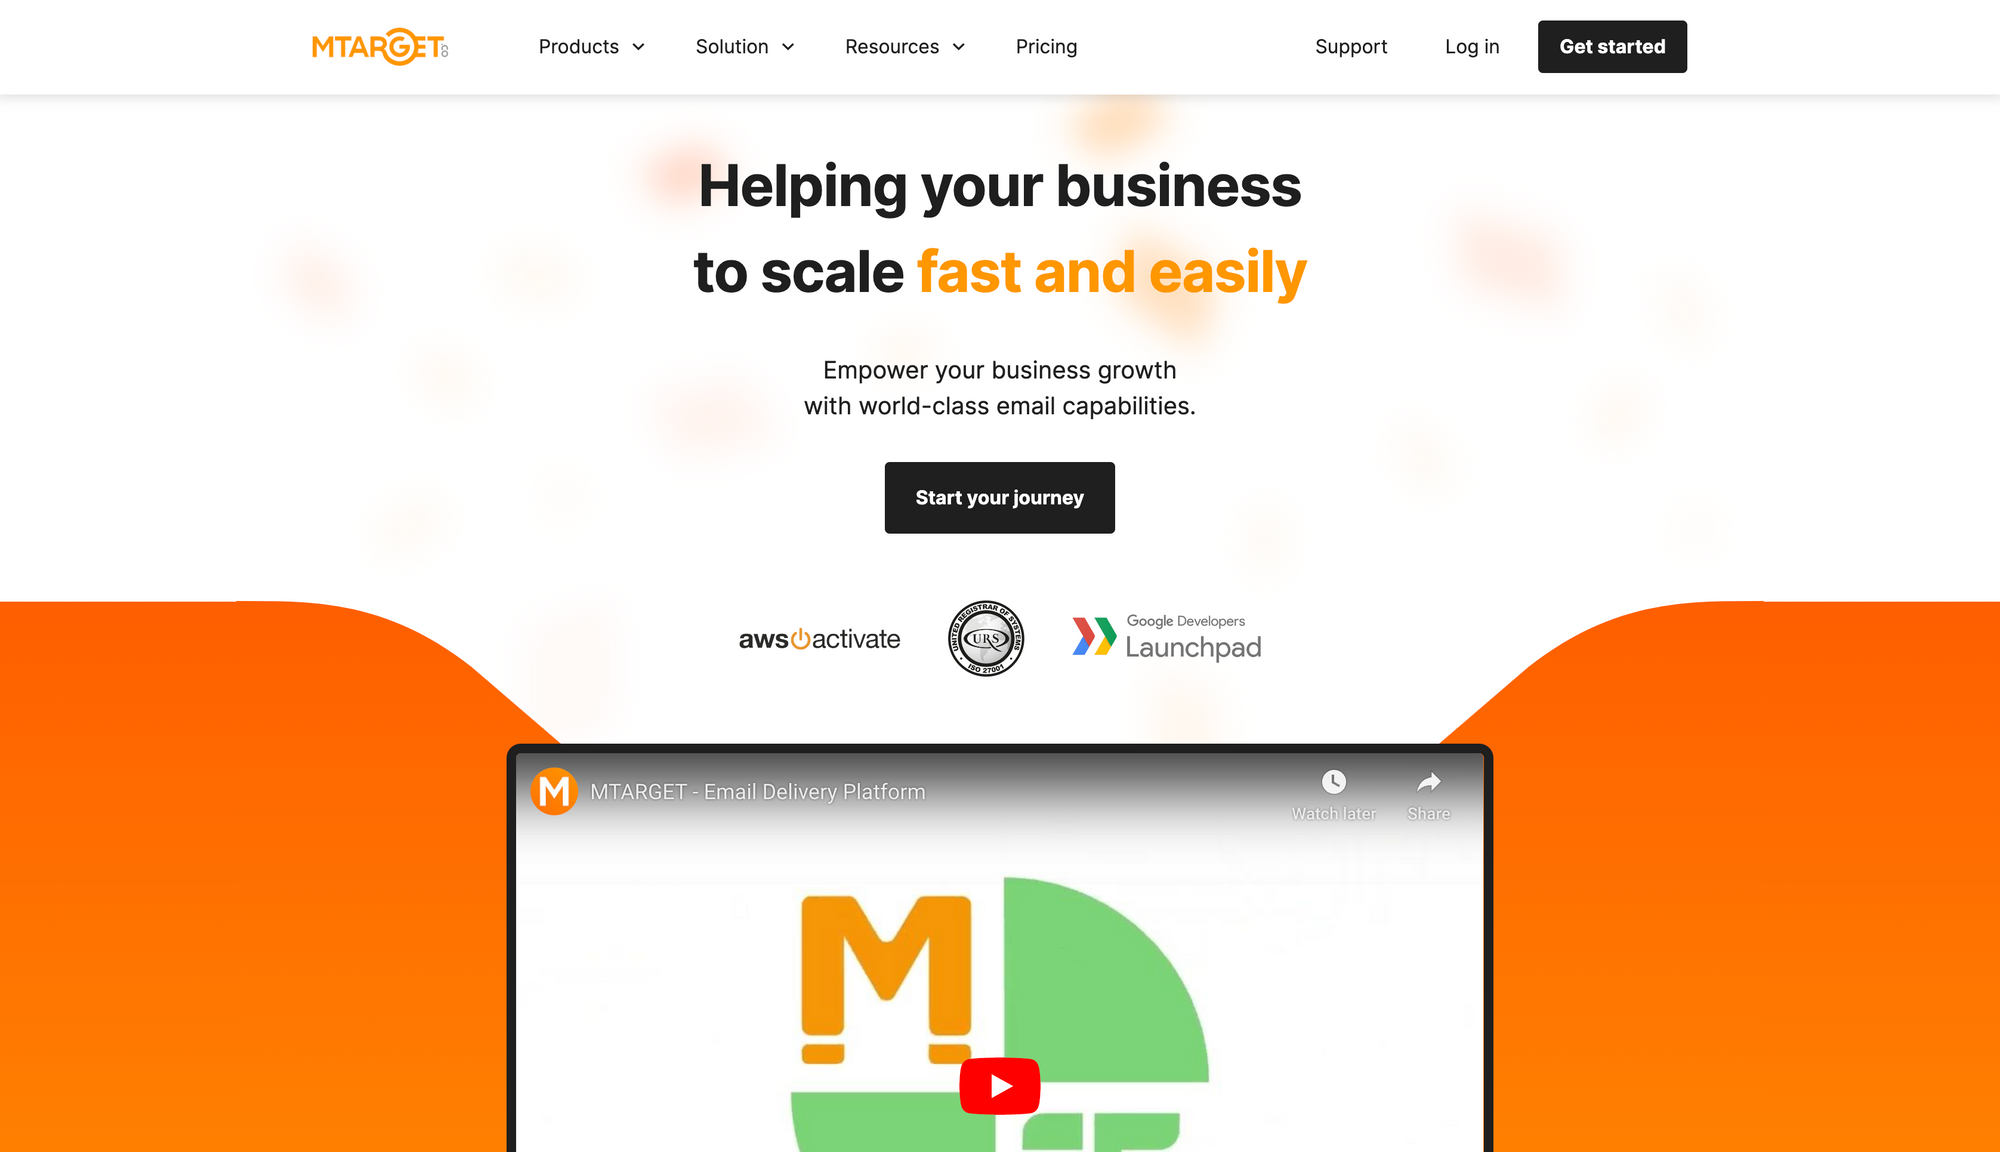 MTARGET: Helping your business to scale fast and easily.